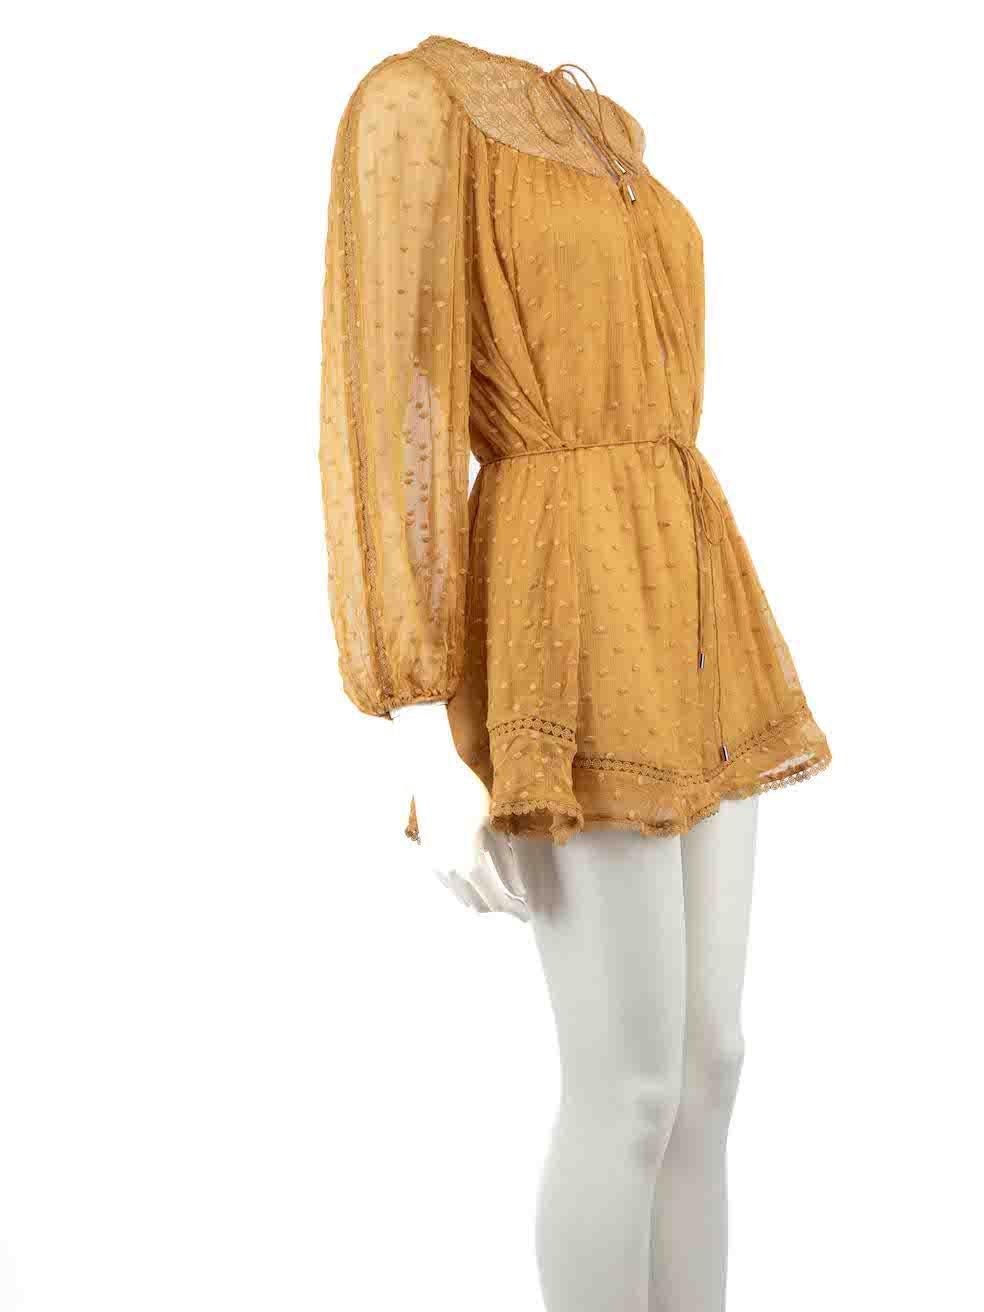 CONDITION is Good. Minor wear to playsuit is evident. Light wear to the fabric surface with a number of plucks to the weave and embroidery threads throughout this used Zimmermann designer resale item.
 
 Details
 Yellow
 Silk
 Playsuit
 Polkadot